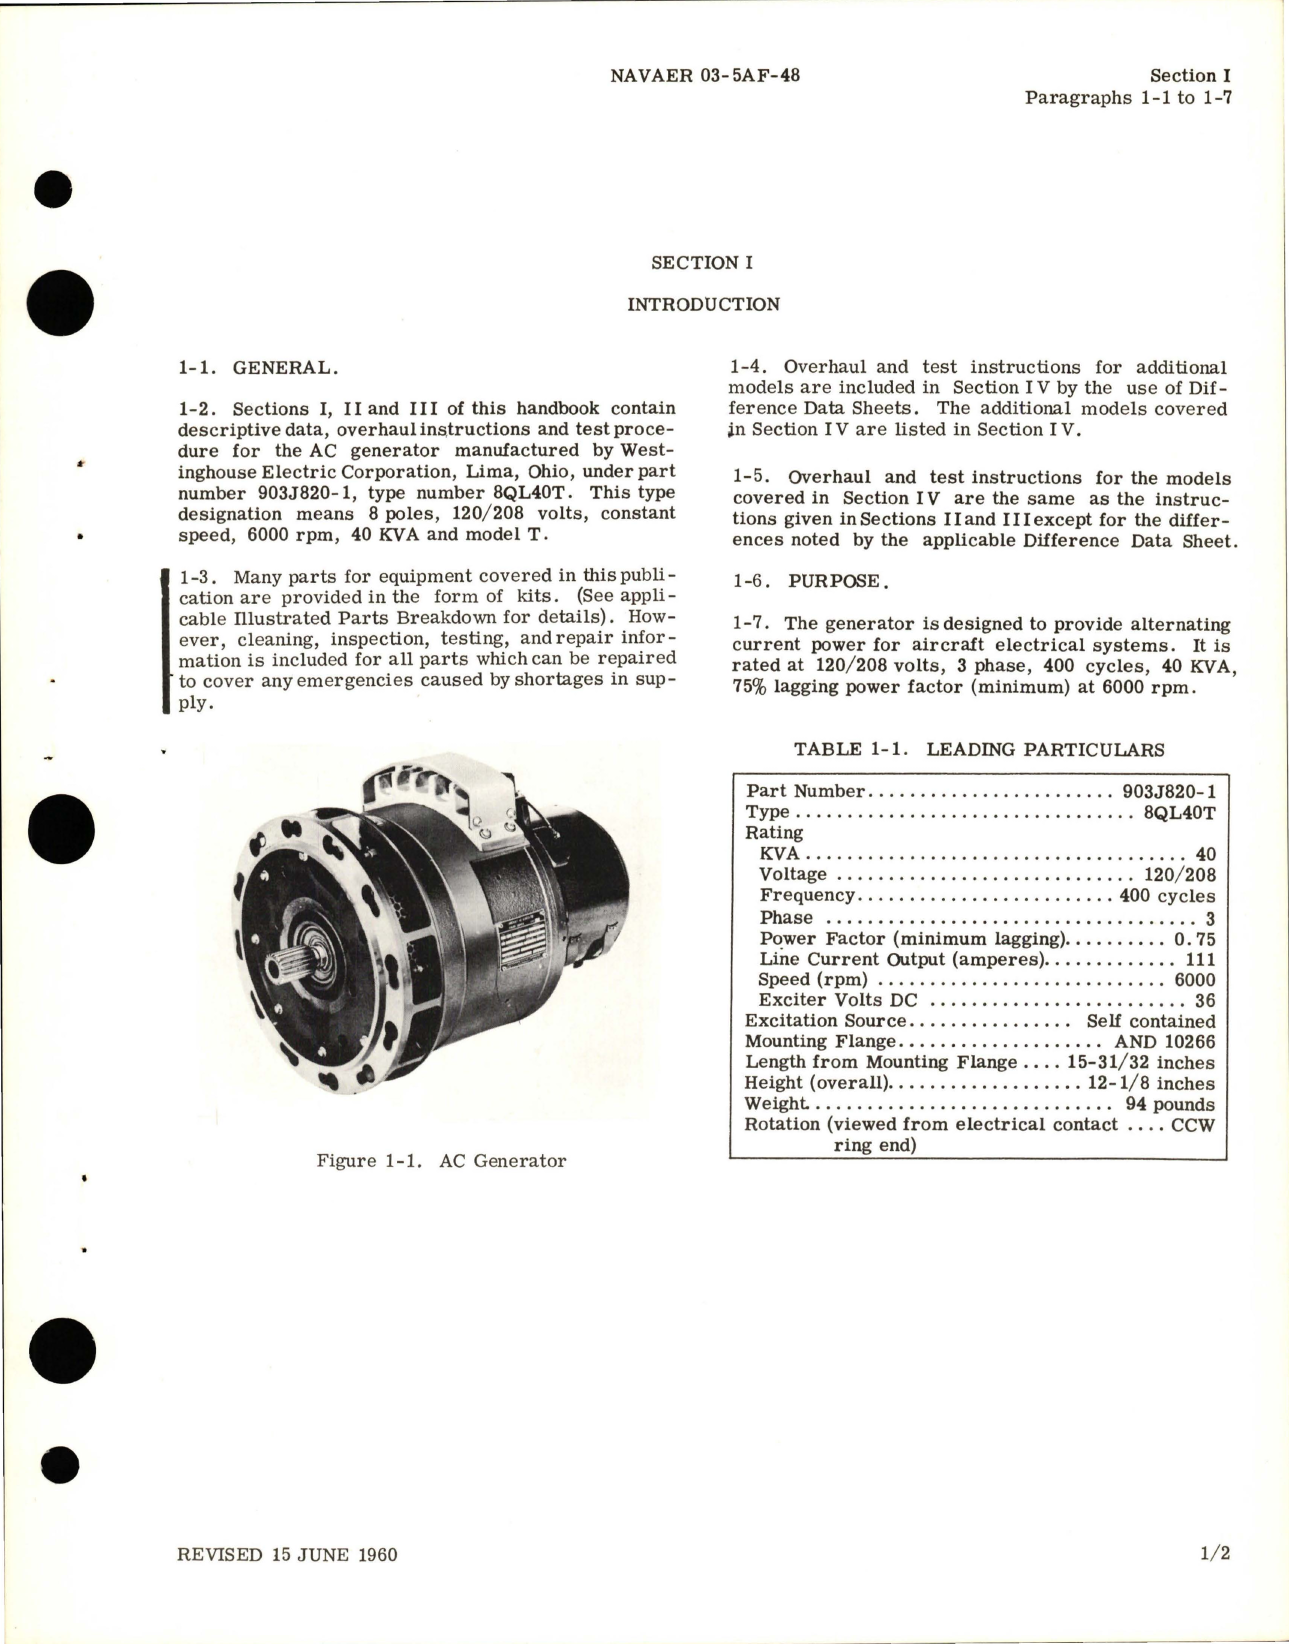 Sample page 5 from AirCorps Library document: Operation, Service and Overhaul Instructions for AC Generator - Parts 903J820-1 and A50J207-2 